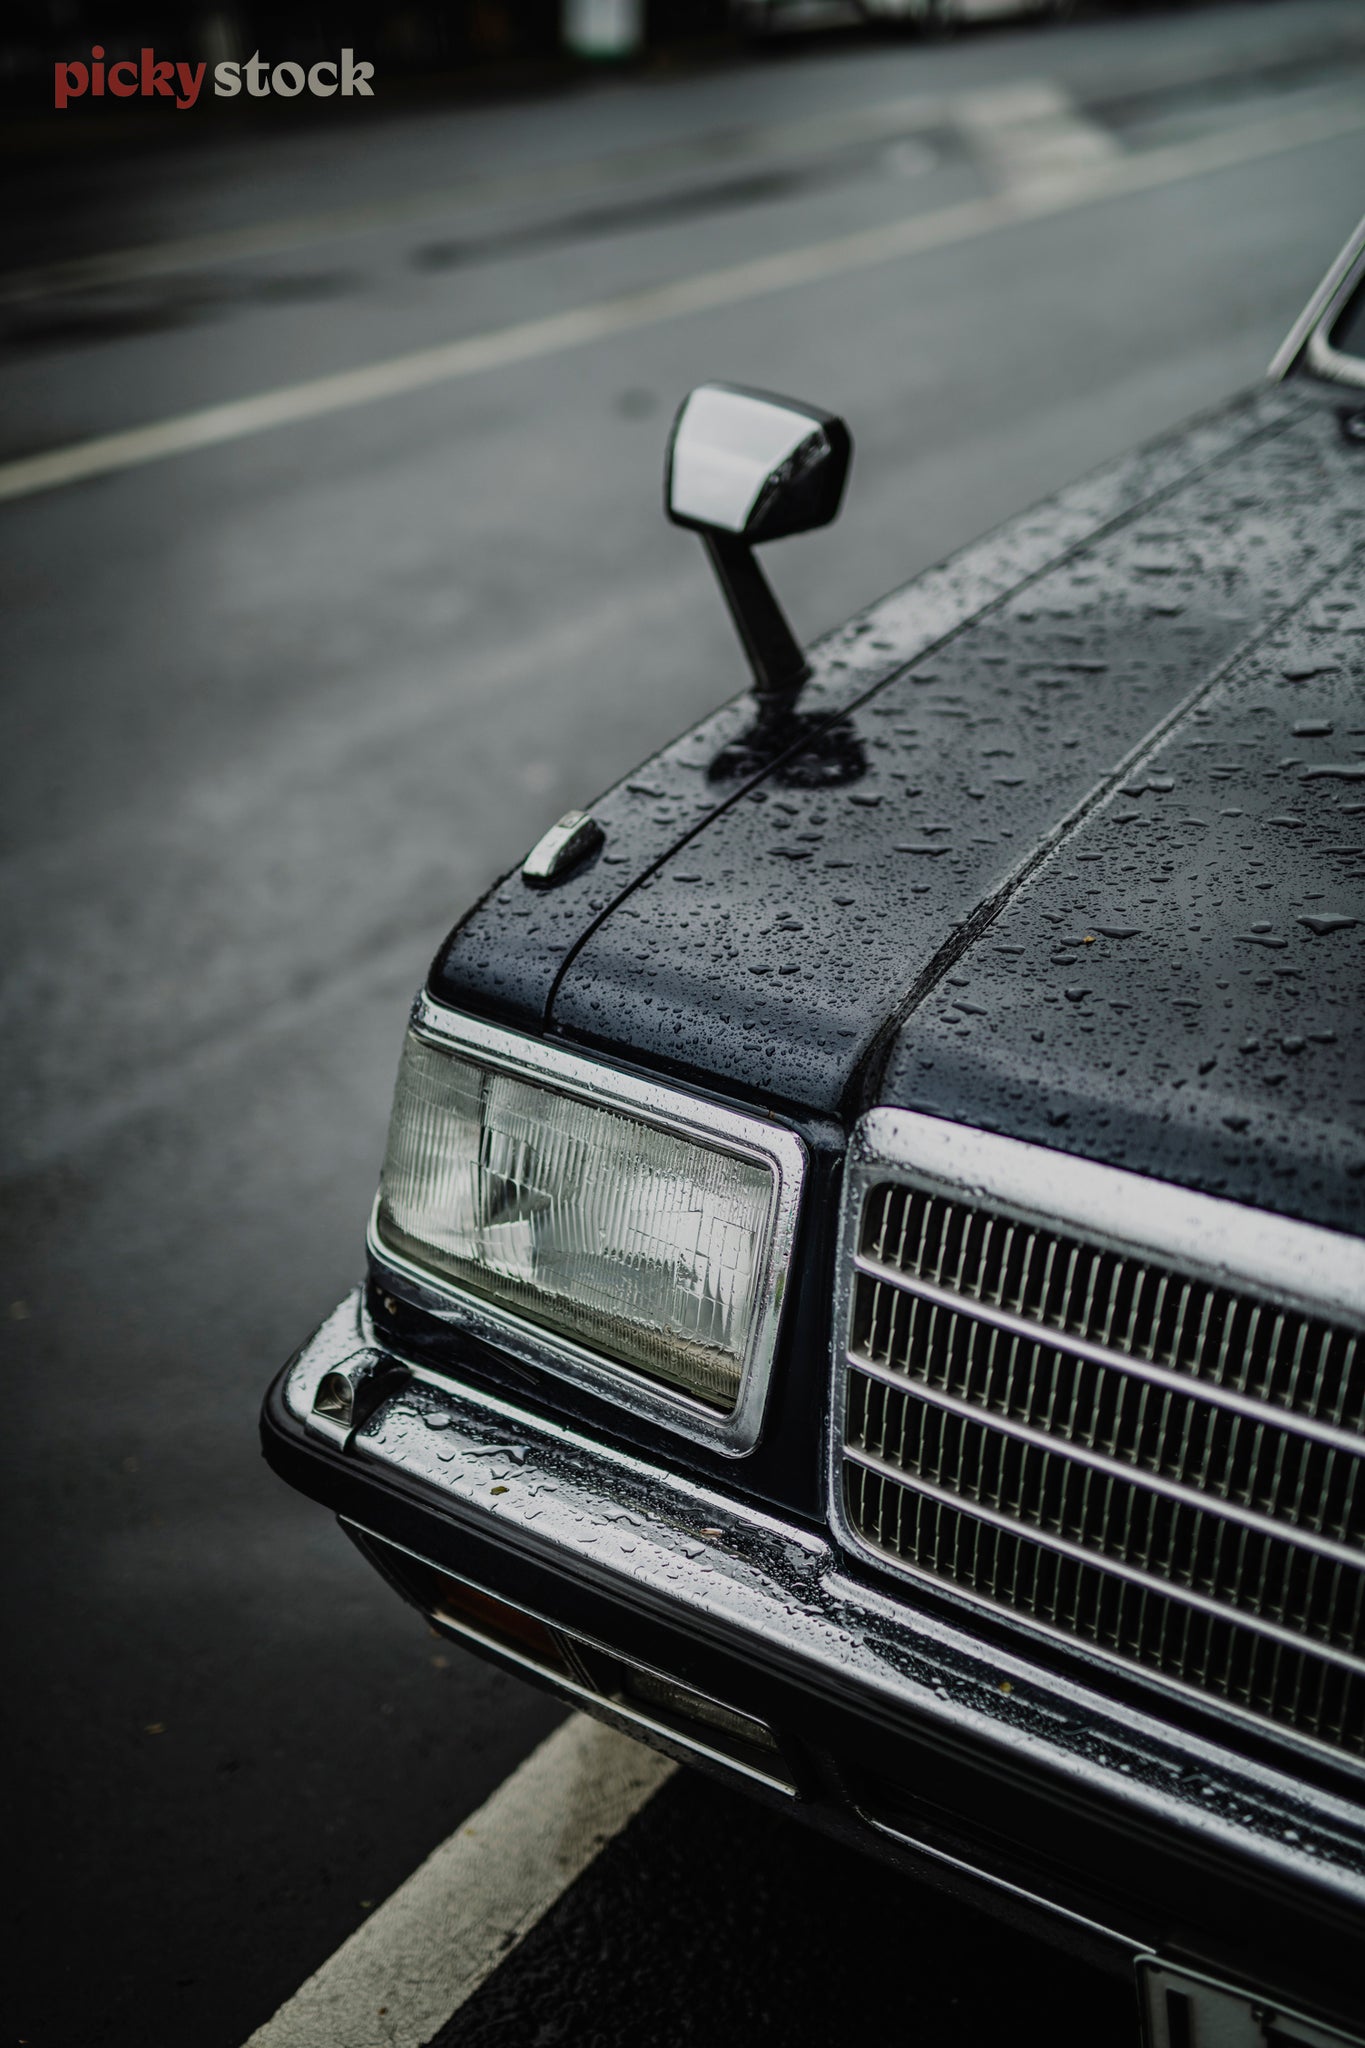 Droplets of water sit on the bonnet of a vintage navy / teal car. Just the right side of the car is visible with the front grill, wing mirror and headlight as it sits on an angle against the wet ashfelt.